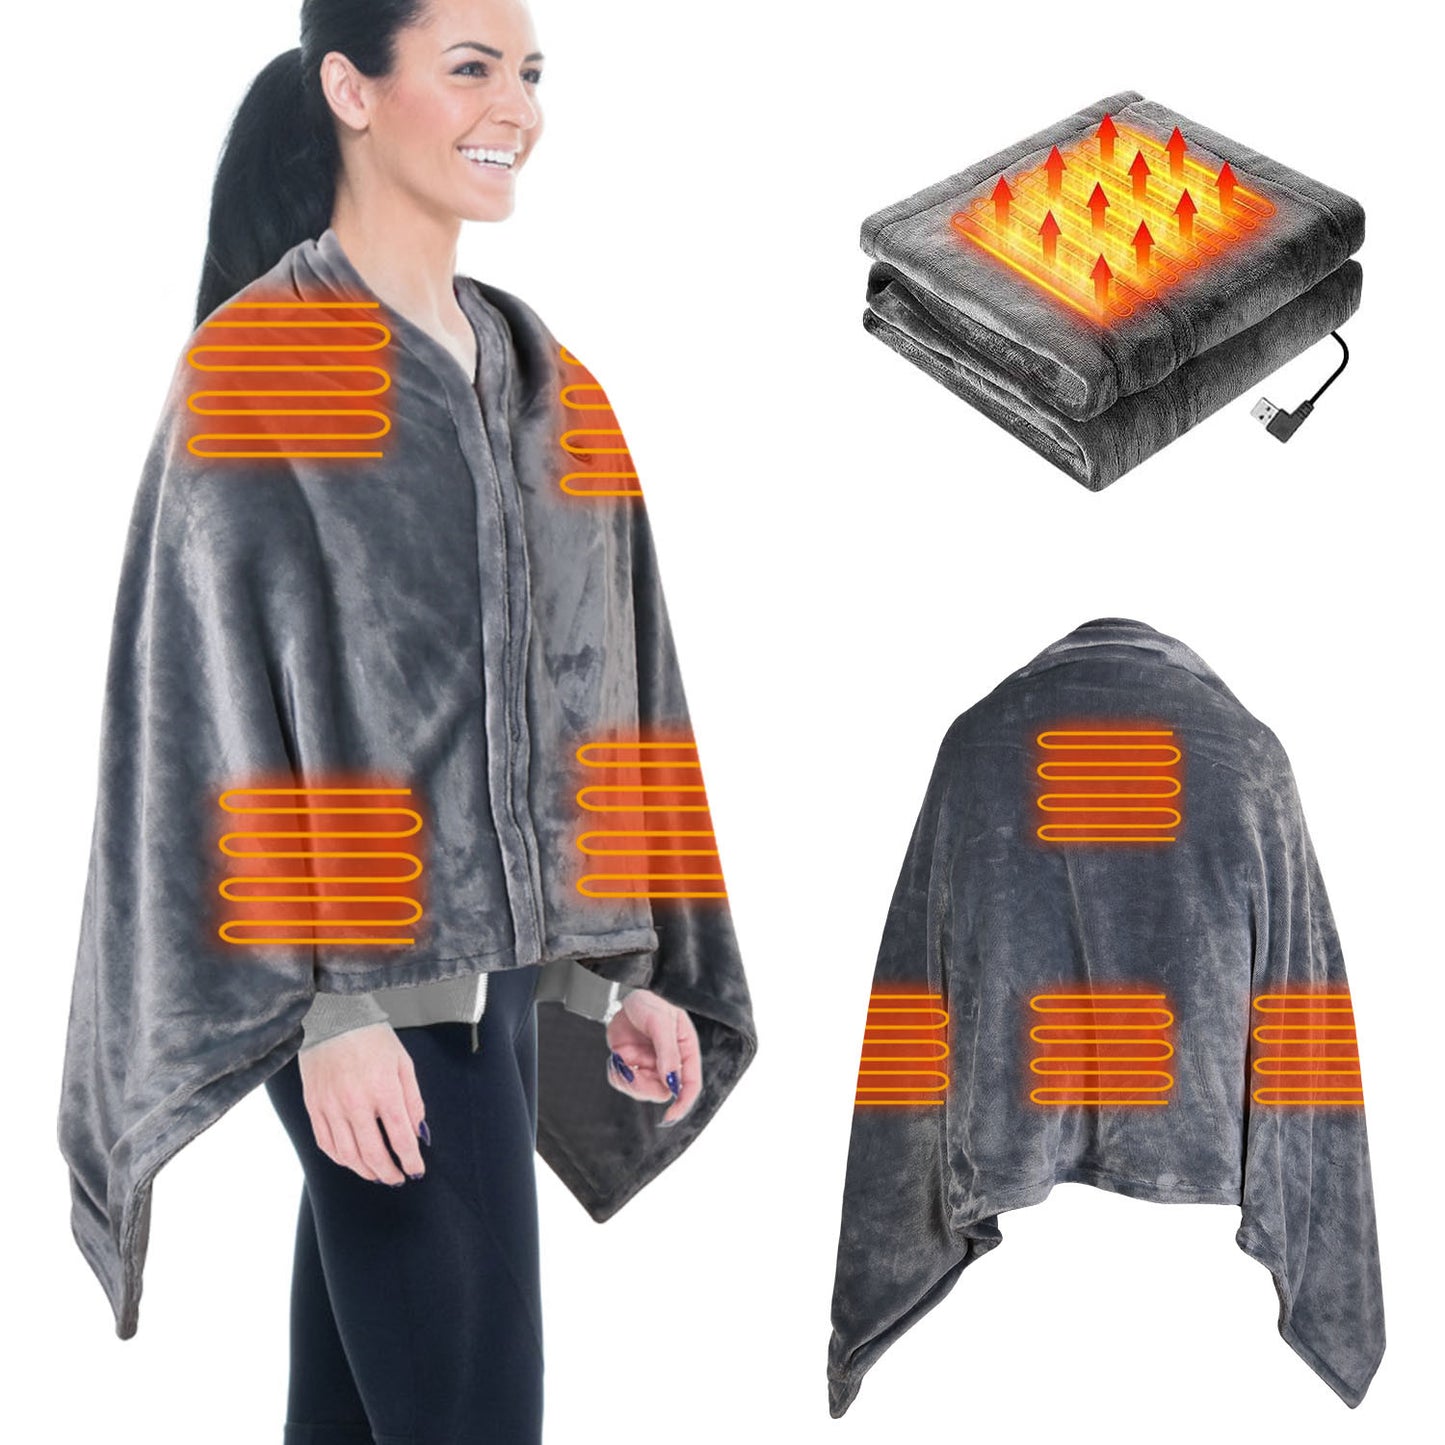 59 Plus 31in USB Heated Blanket Electric Heated Blanket Heated Poncho Shawl Wrap Throw with Zipper Washable for Home Office